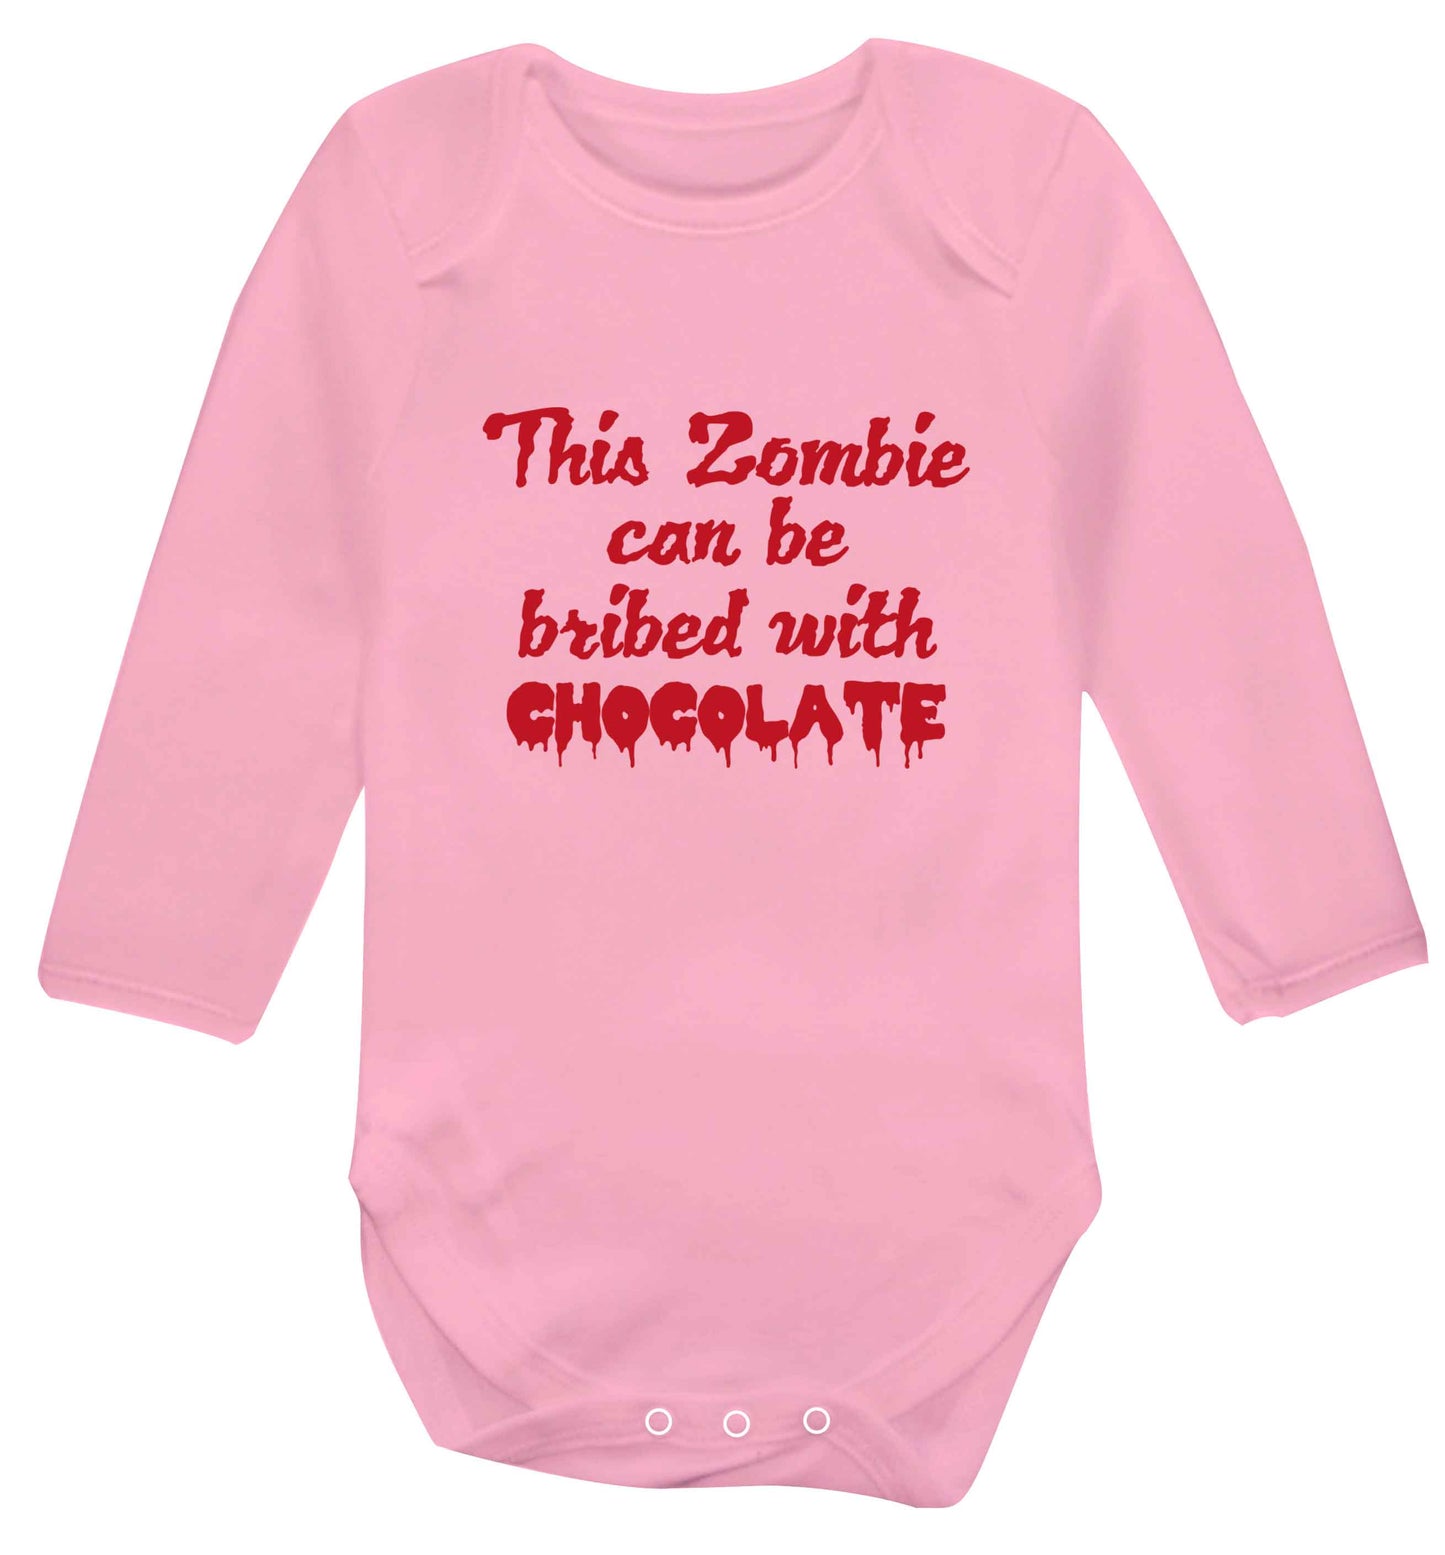 This zombie can be bribed with chocolate baby vest long sleeved pale pink 6-12 months